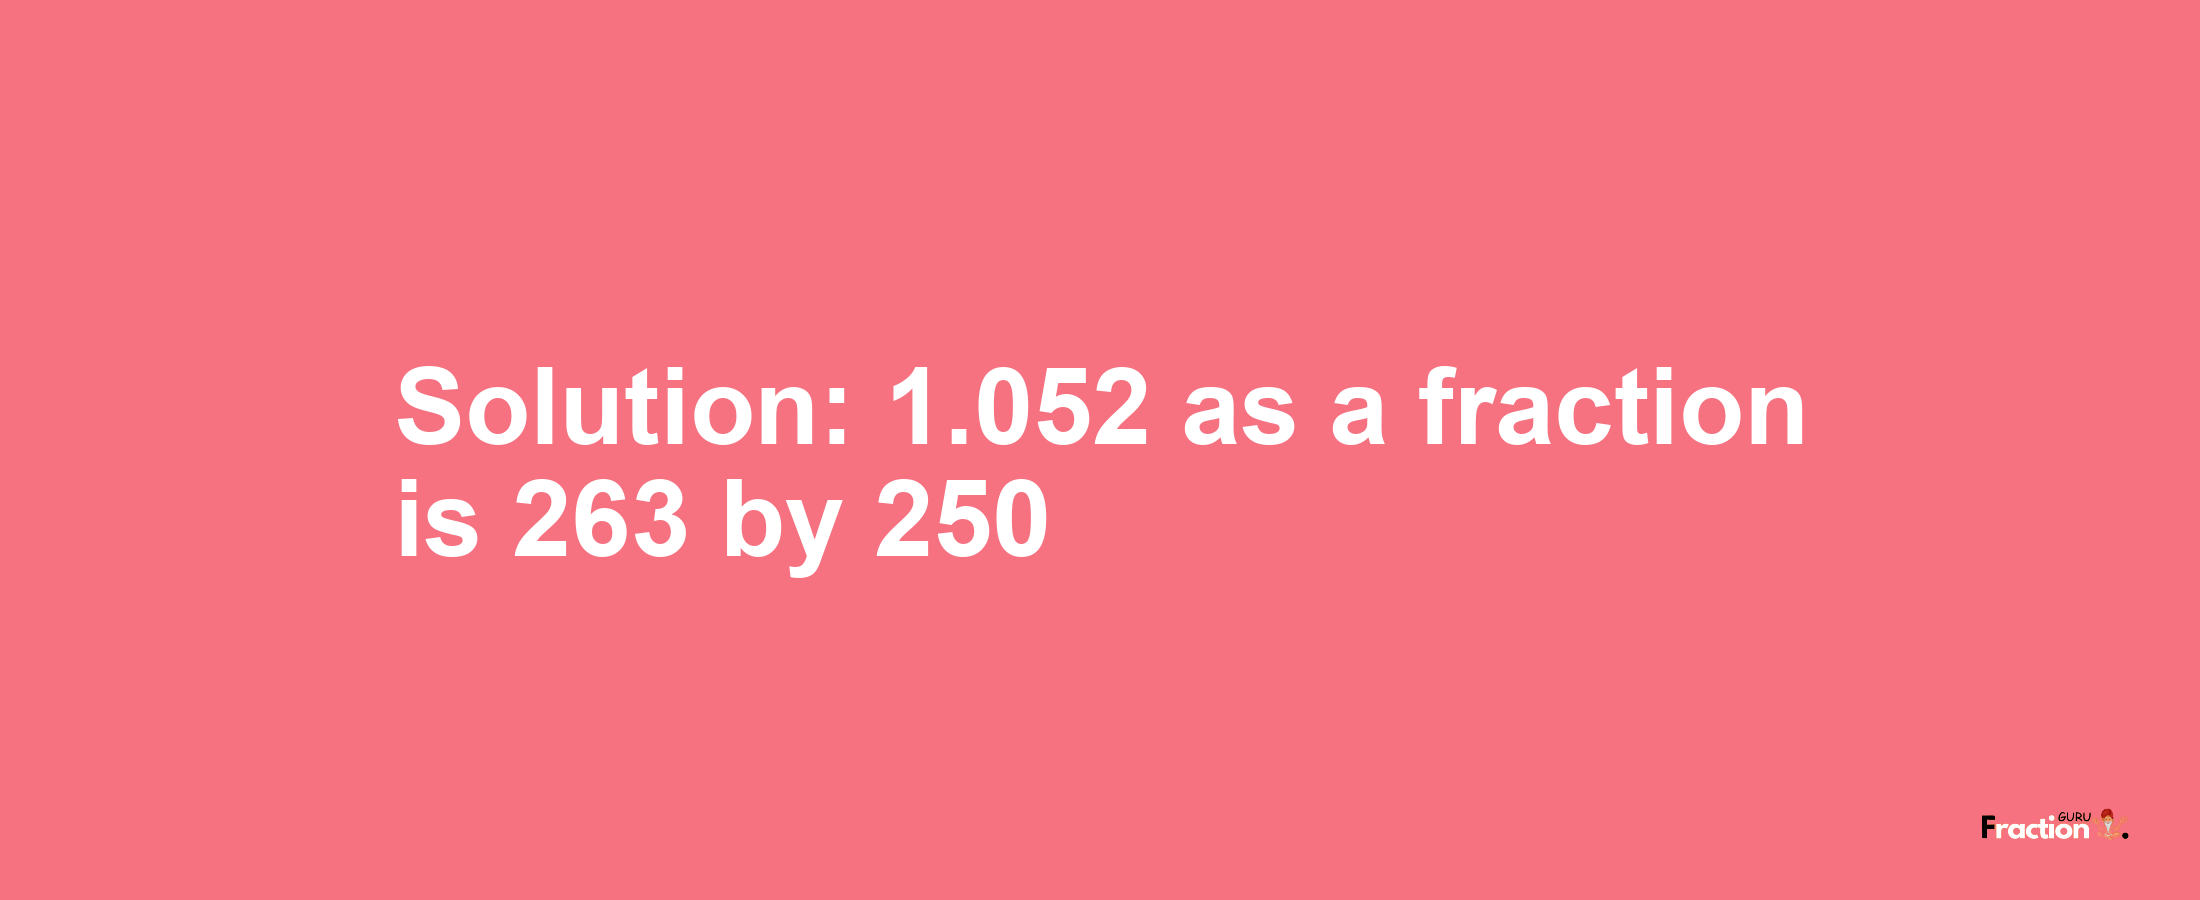 Solution:1.052 as a fraction is 263/250